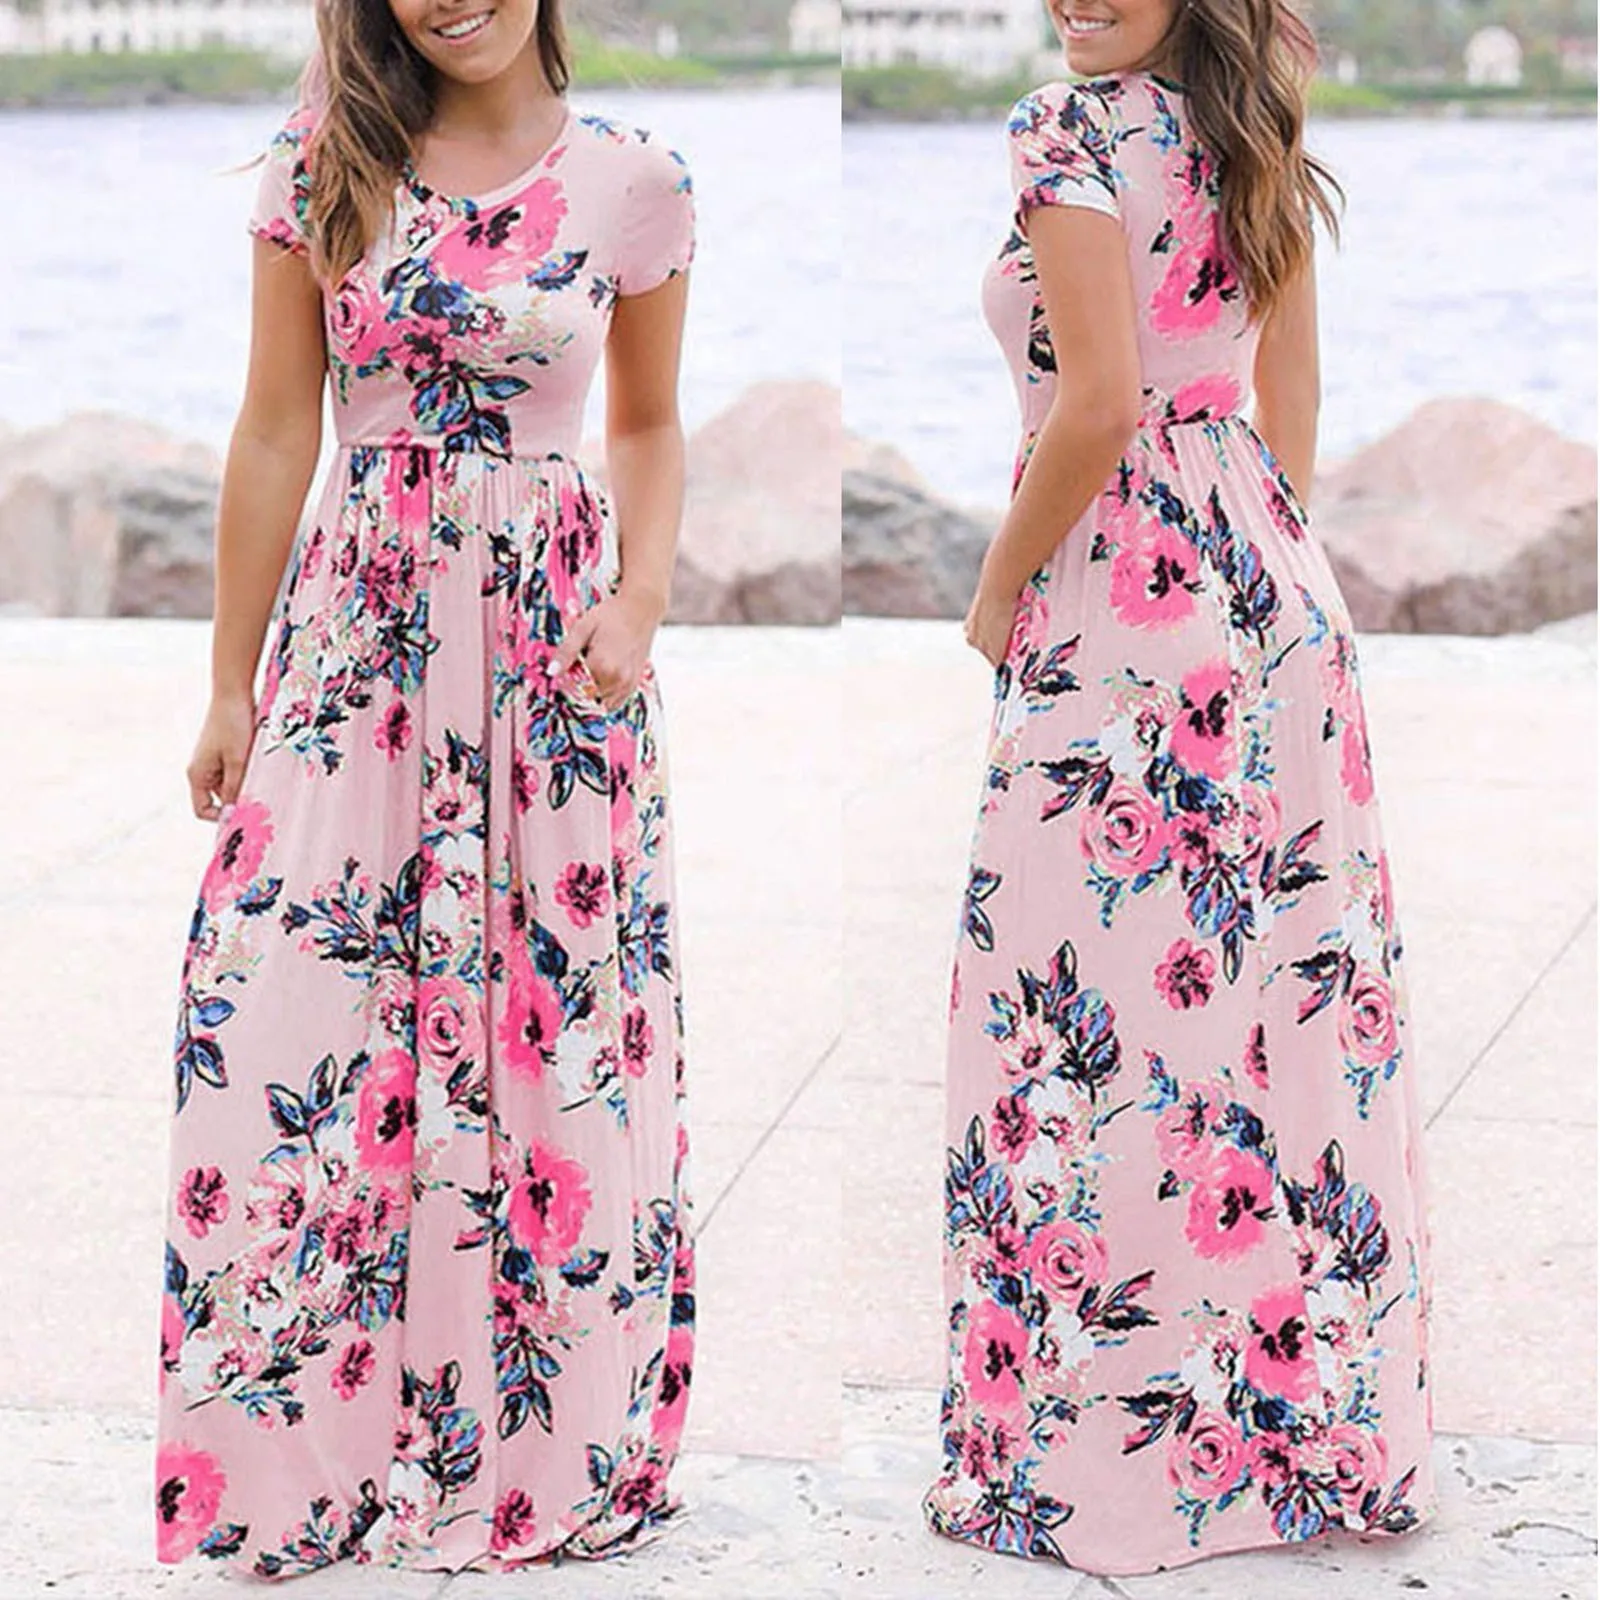 Floral Printed Dress For Women Summer Casual Sexy Maxi Dress WIth Pockets S...